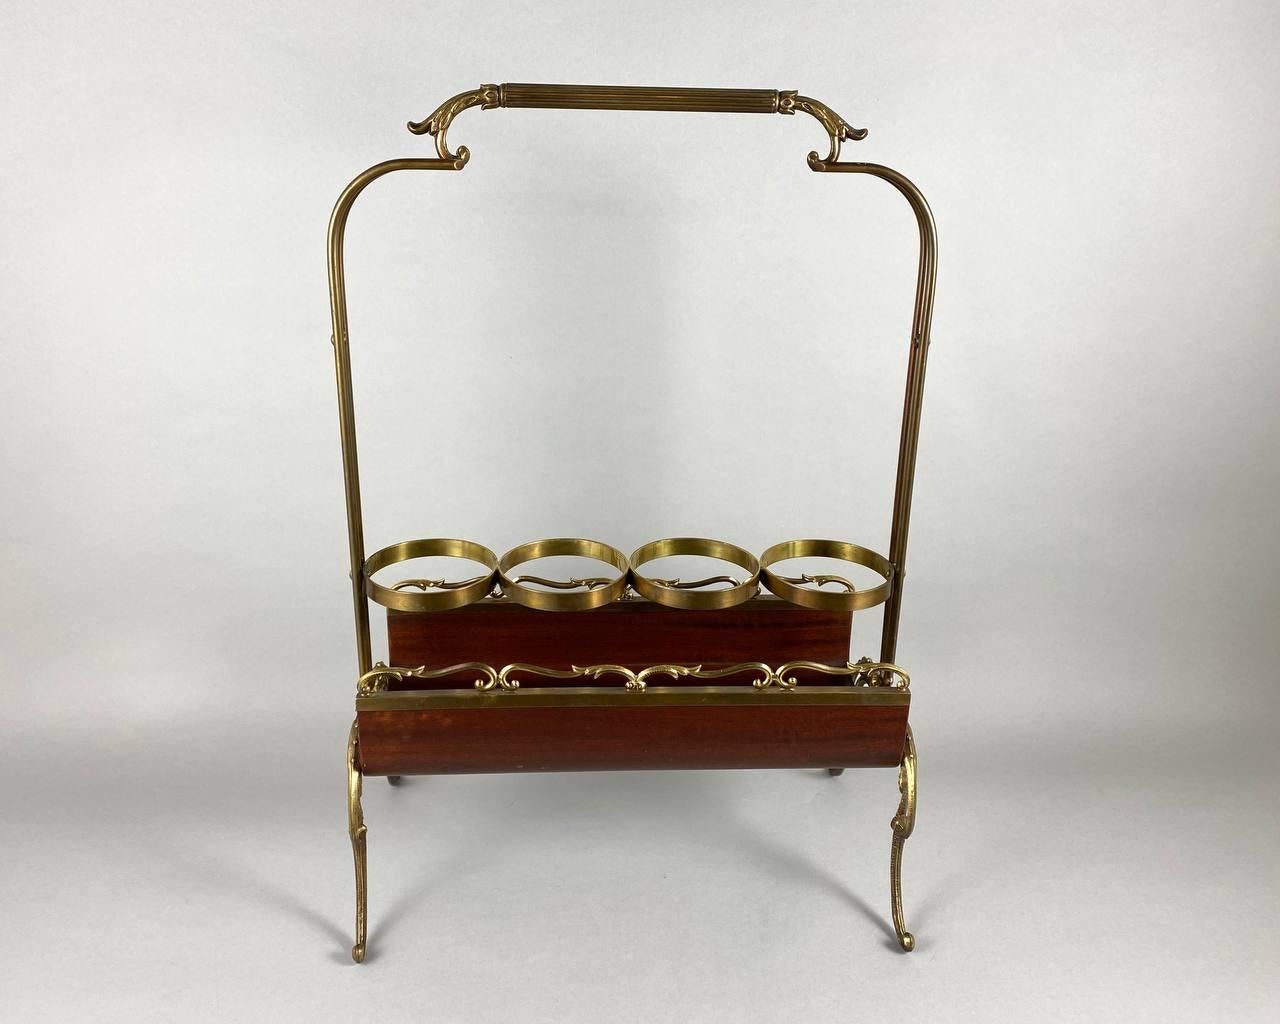 French vintage Art-Nouveau wine rack to store 4 bottles. With brass and bronze handle and bentwood, 1970s.

This is a very rare item.

This bottle rack will be used to store beautiful bottles of wine and take them to a picnic or to store other